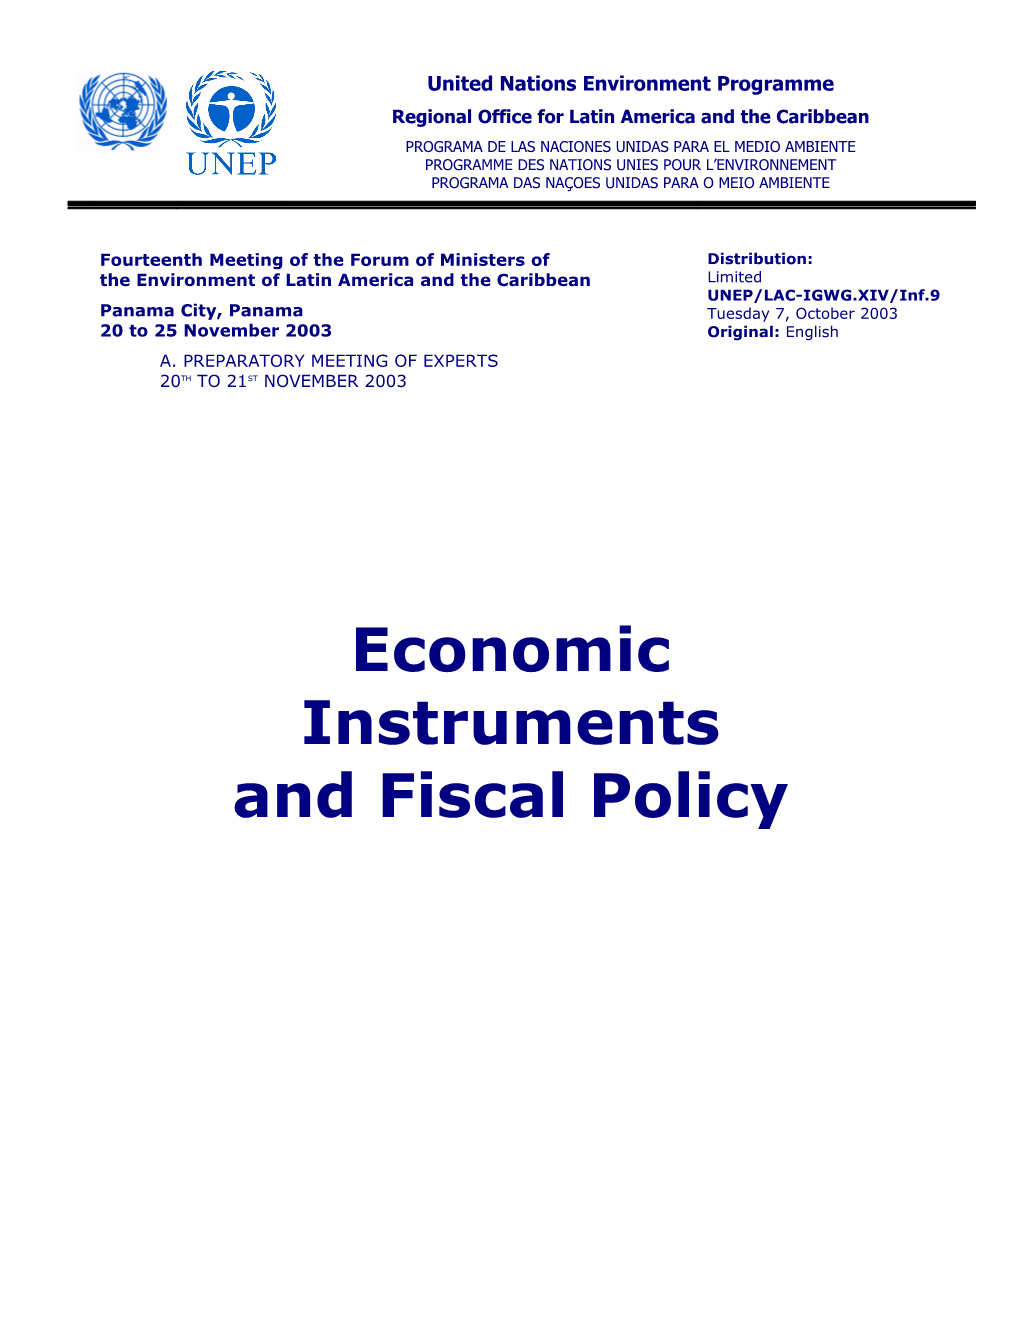 Economic Instruments and Fiscal Policy